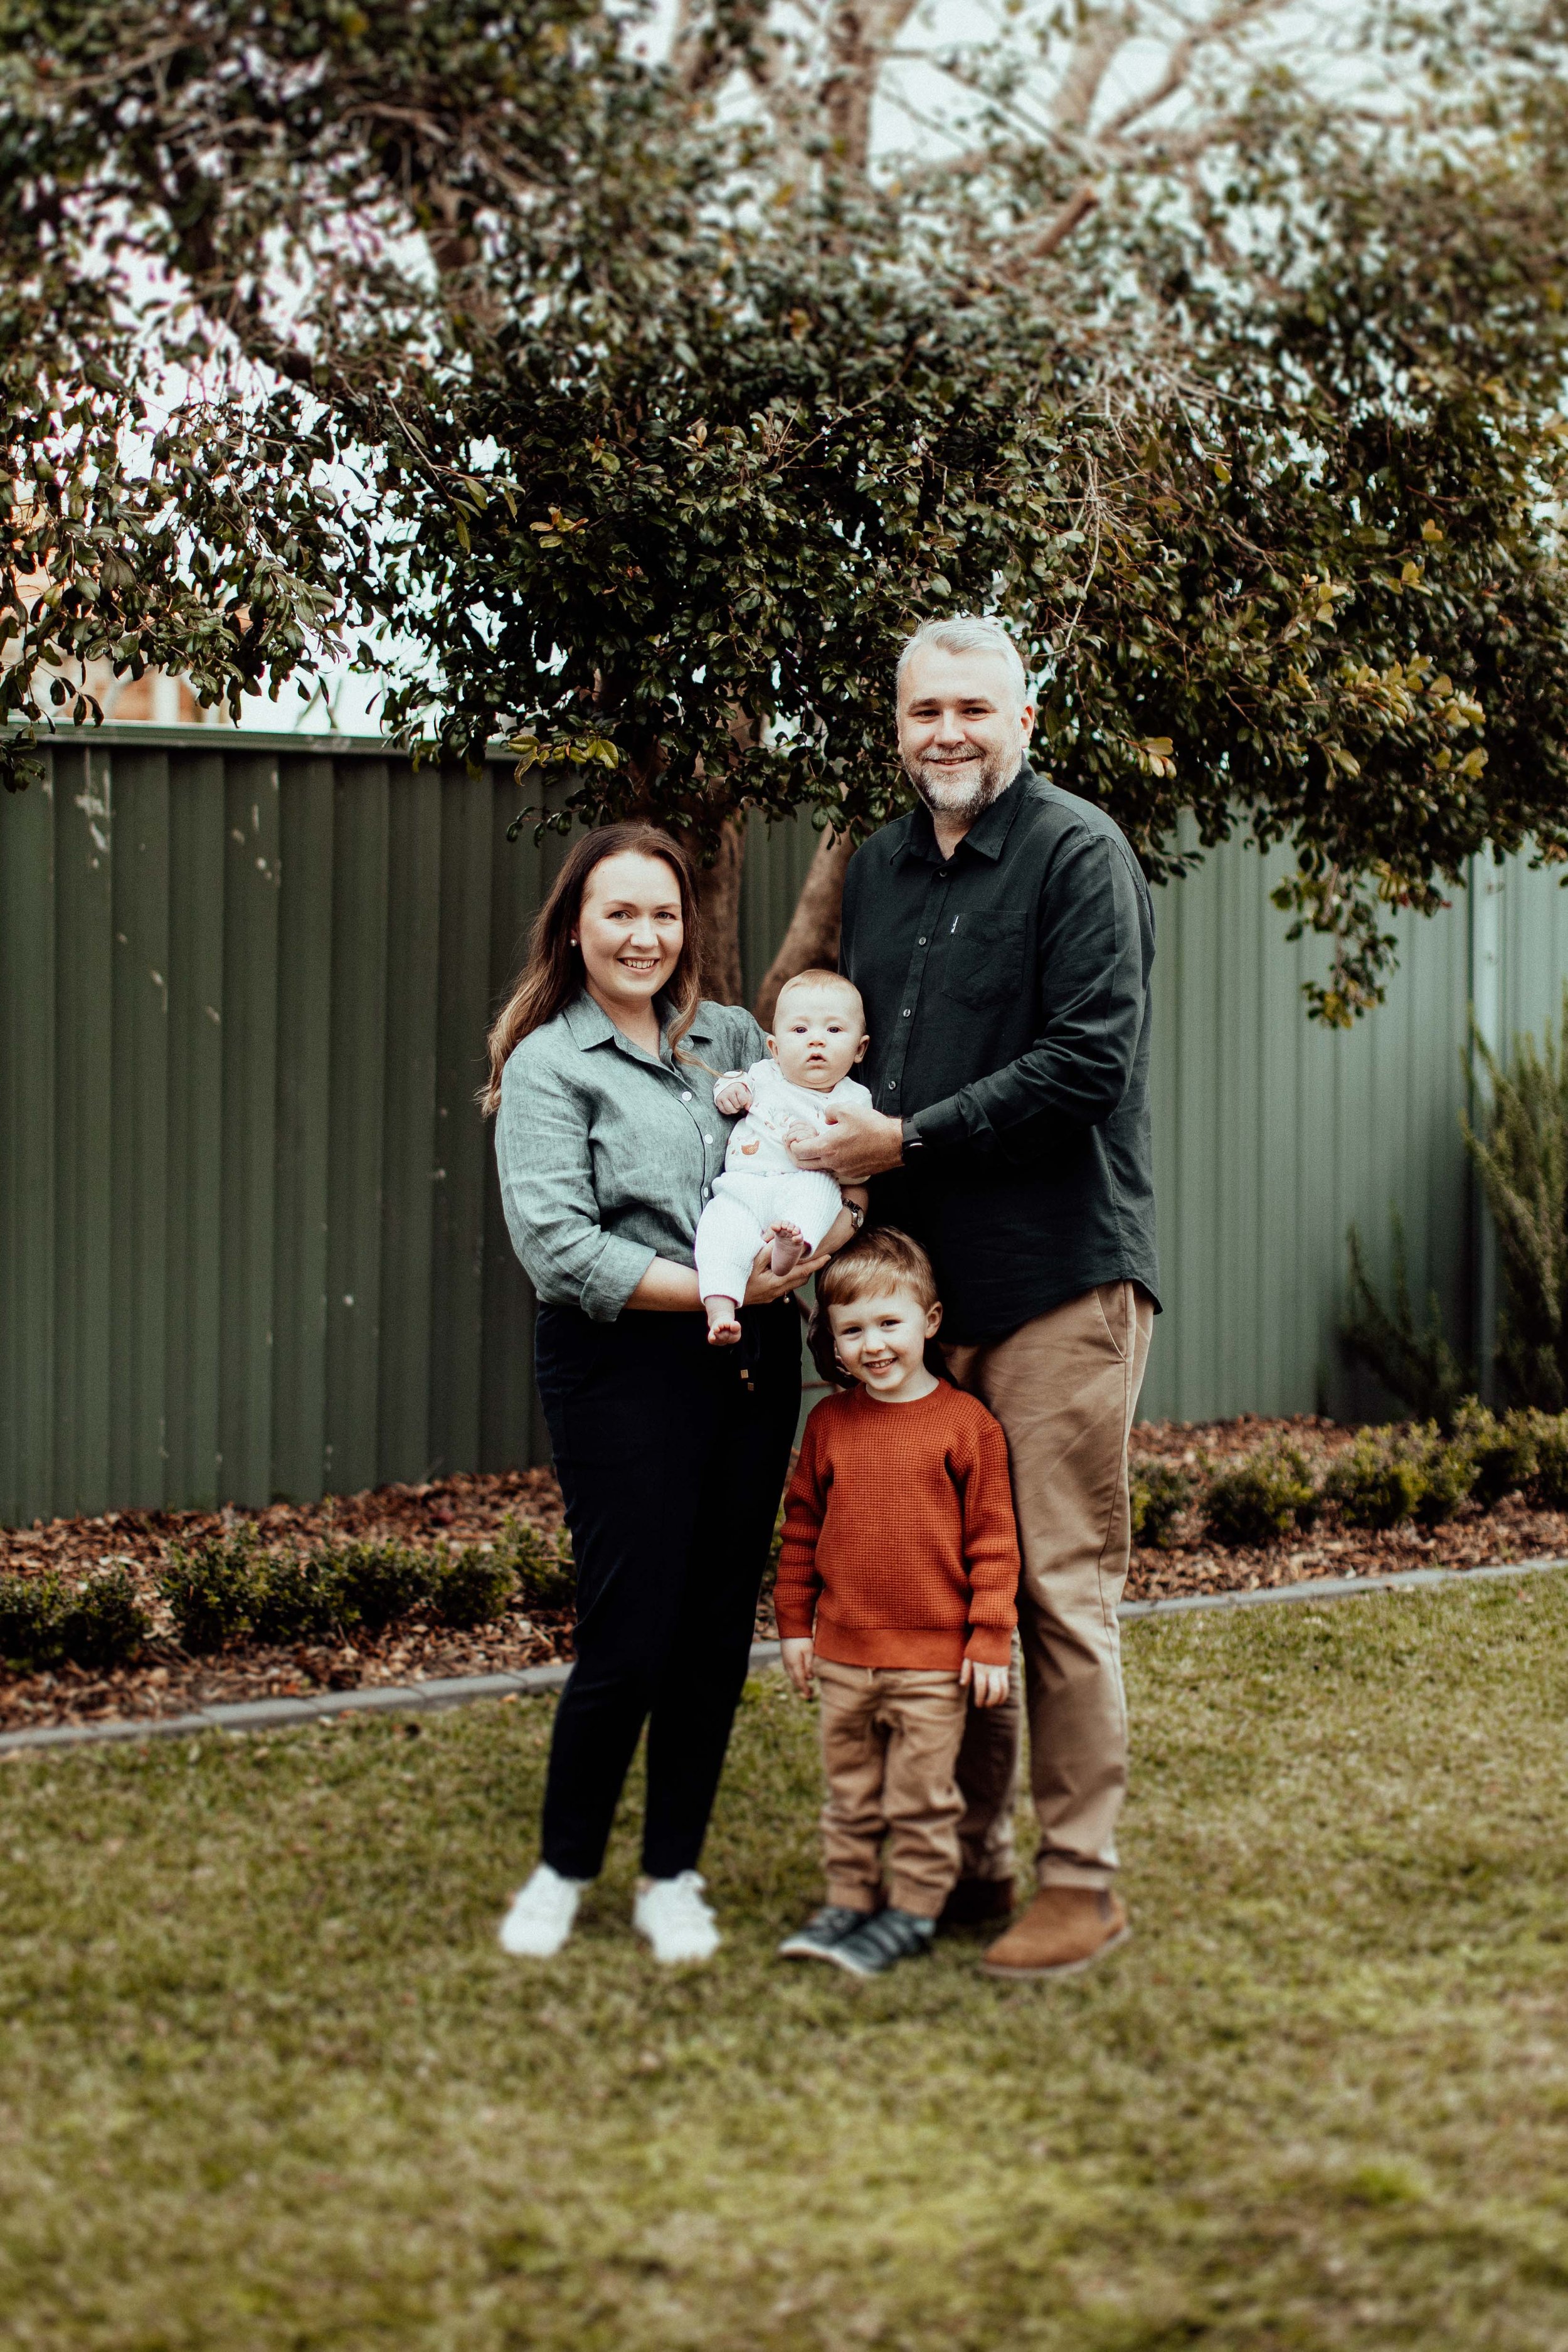 donnelly-family-inhome-family-lifestyle-wollondilly-camden-macarthur-sydney-photography-www.emilyobrienphotography.net-24.jpg